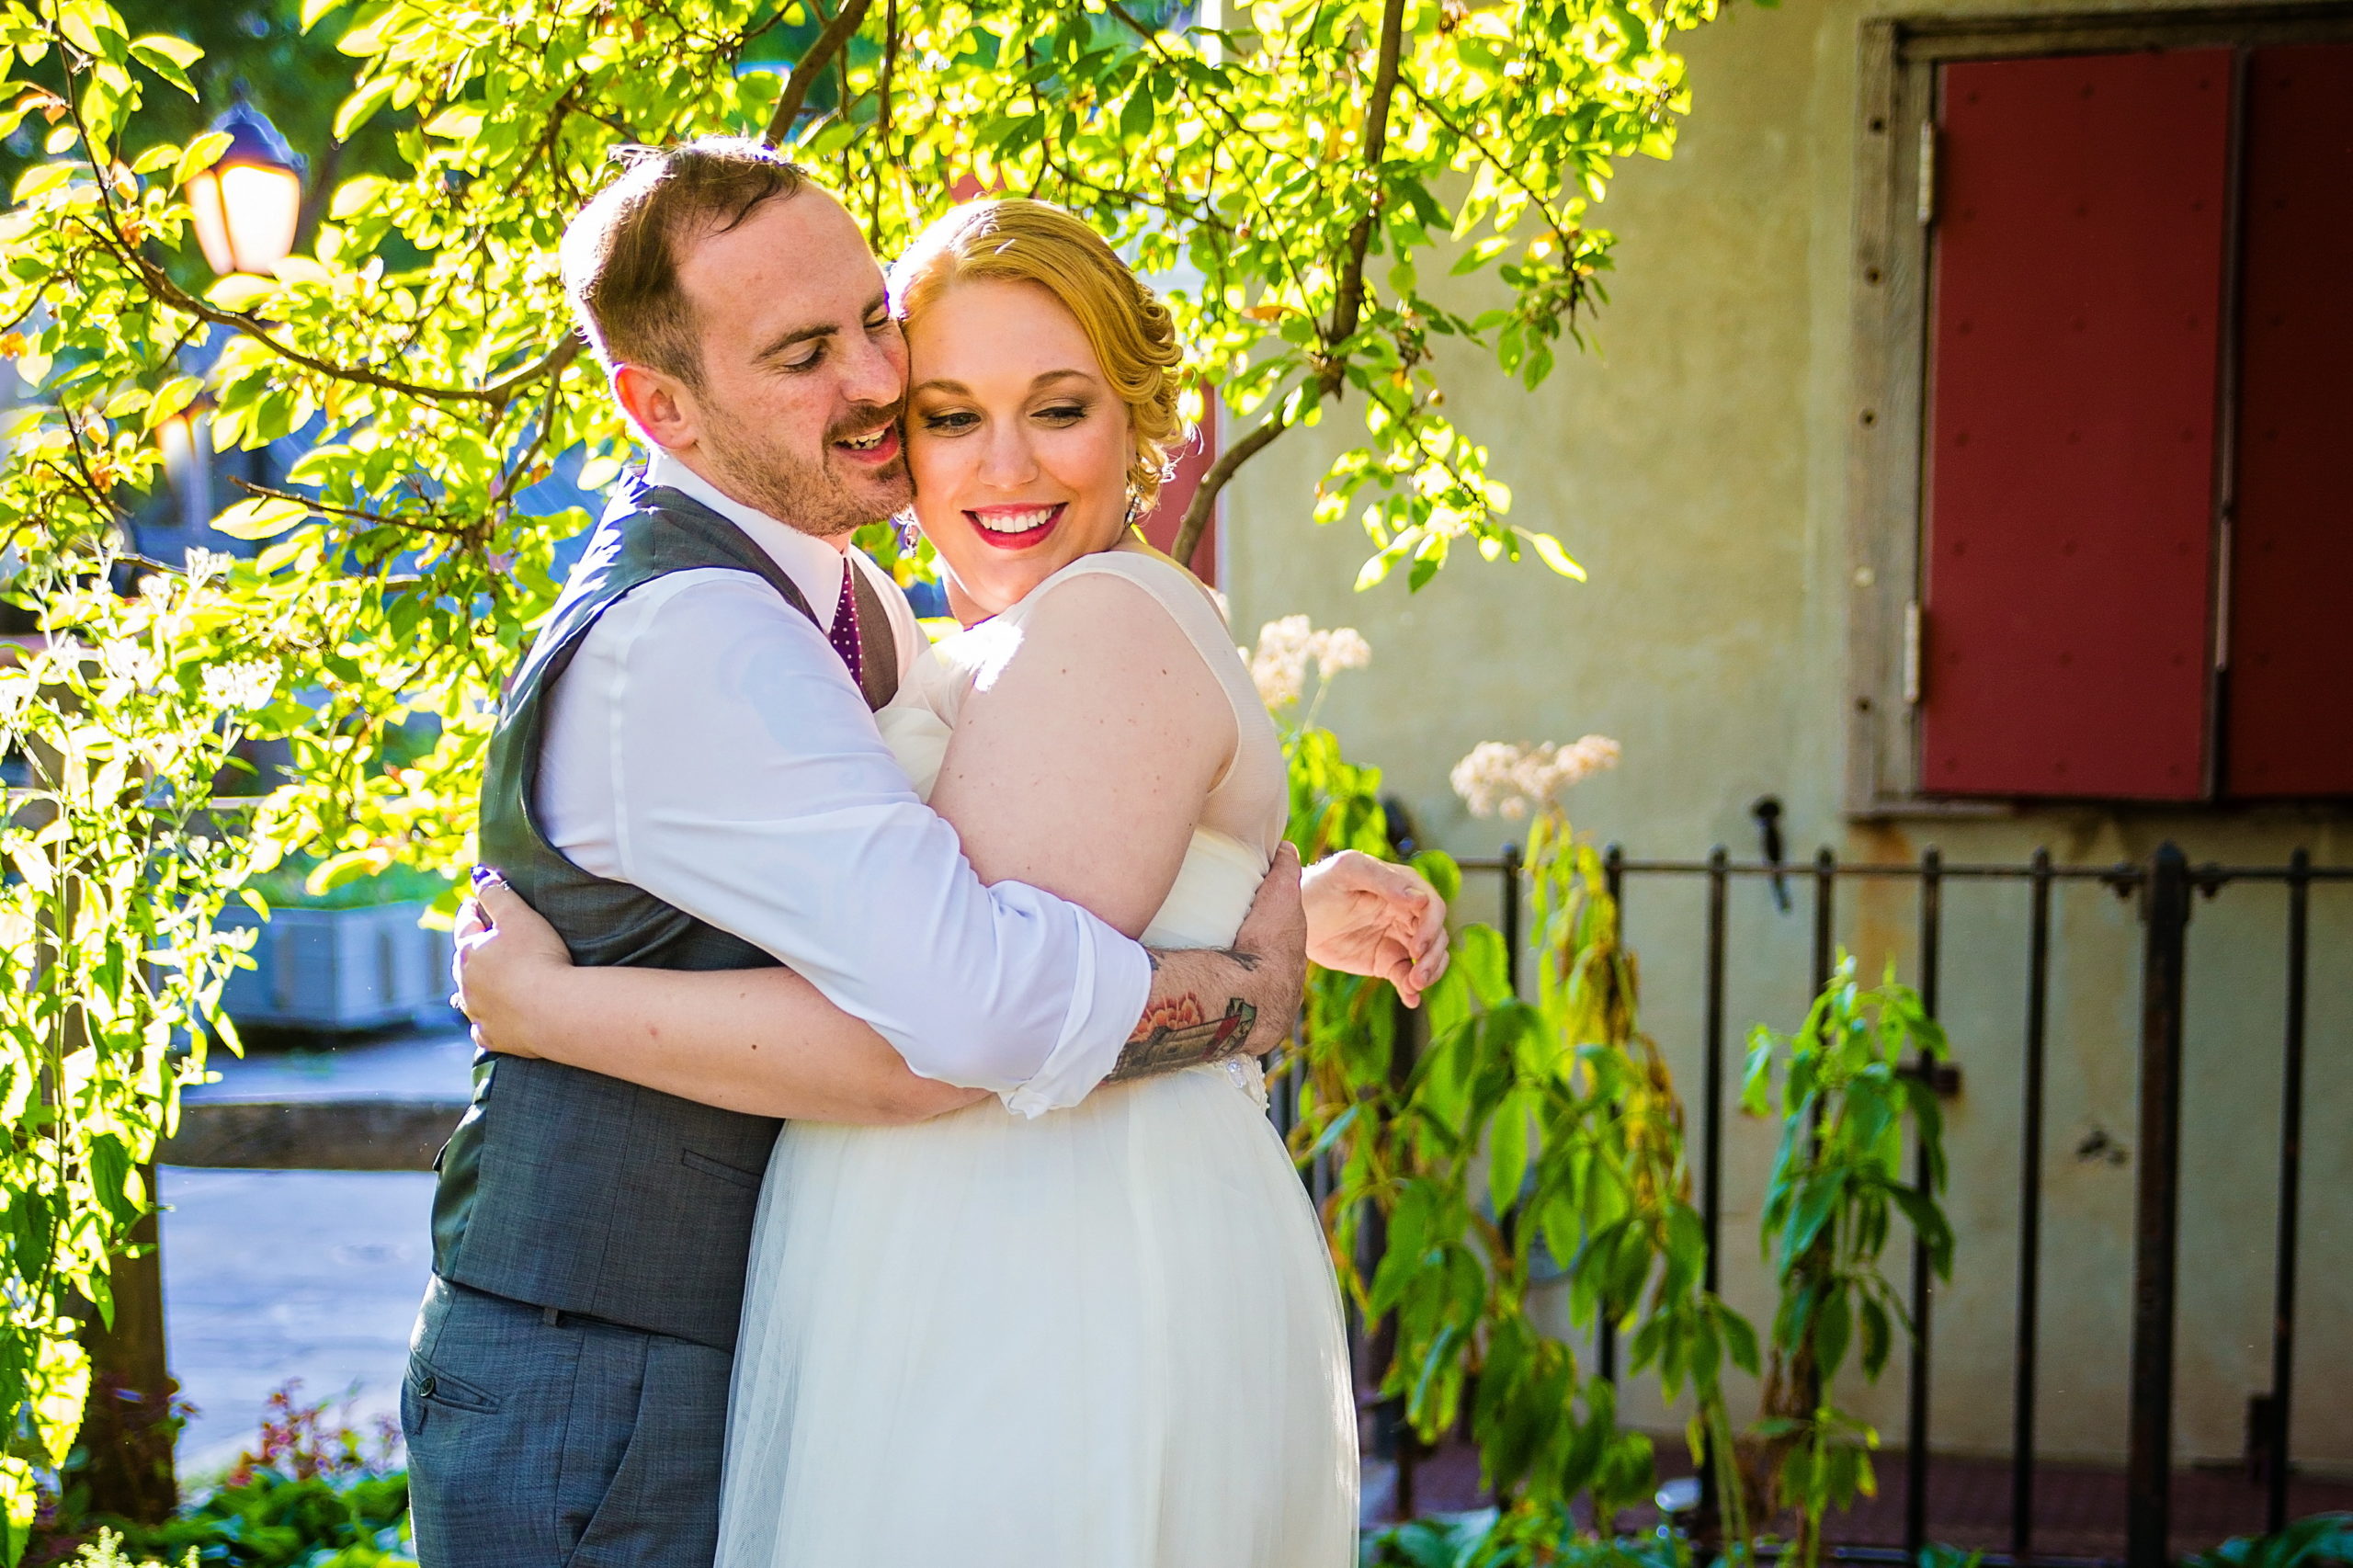 Offbeat bride and groom embrace during their garden wedding.